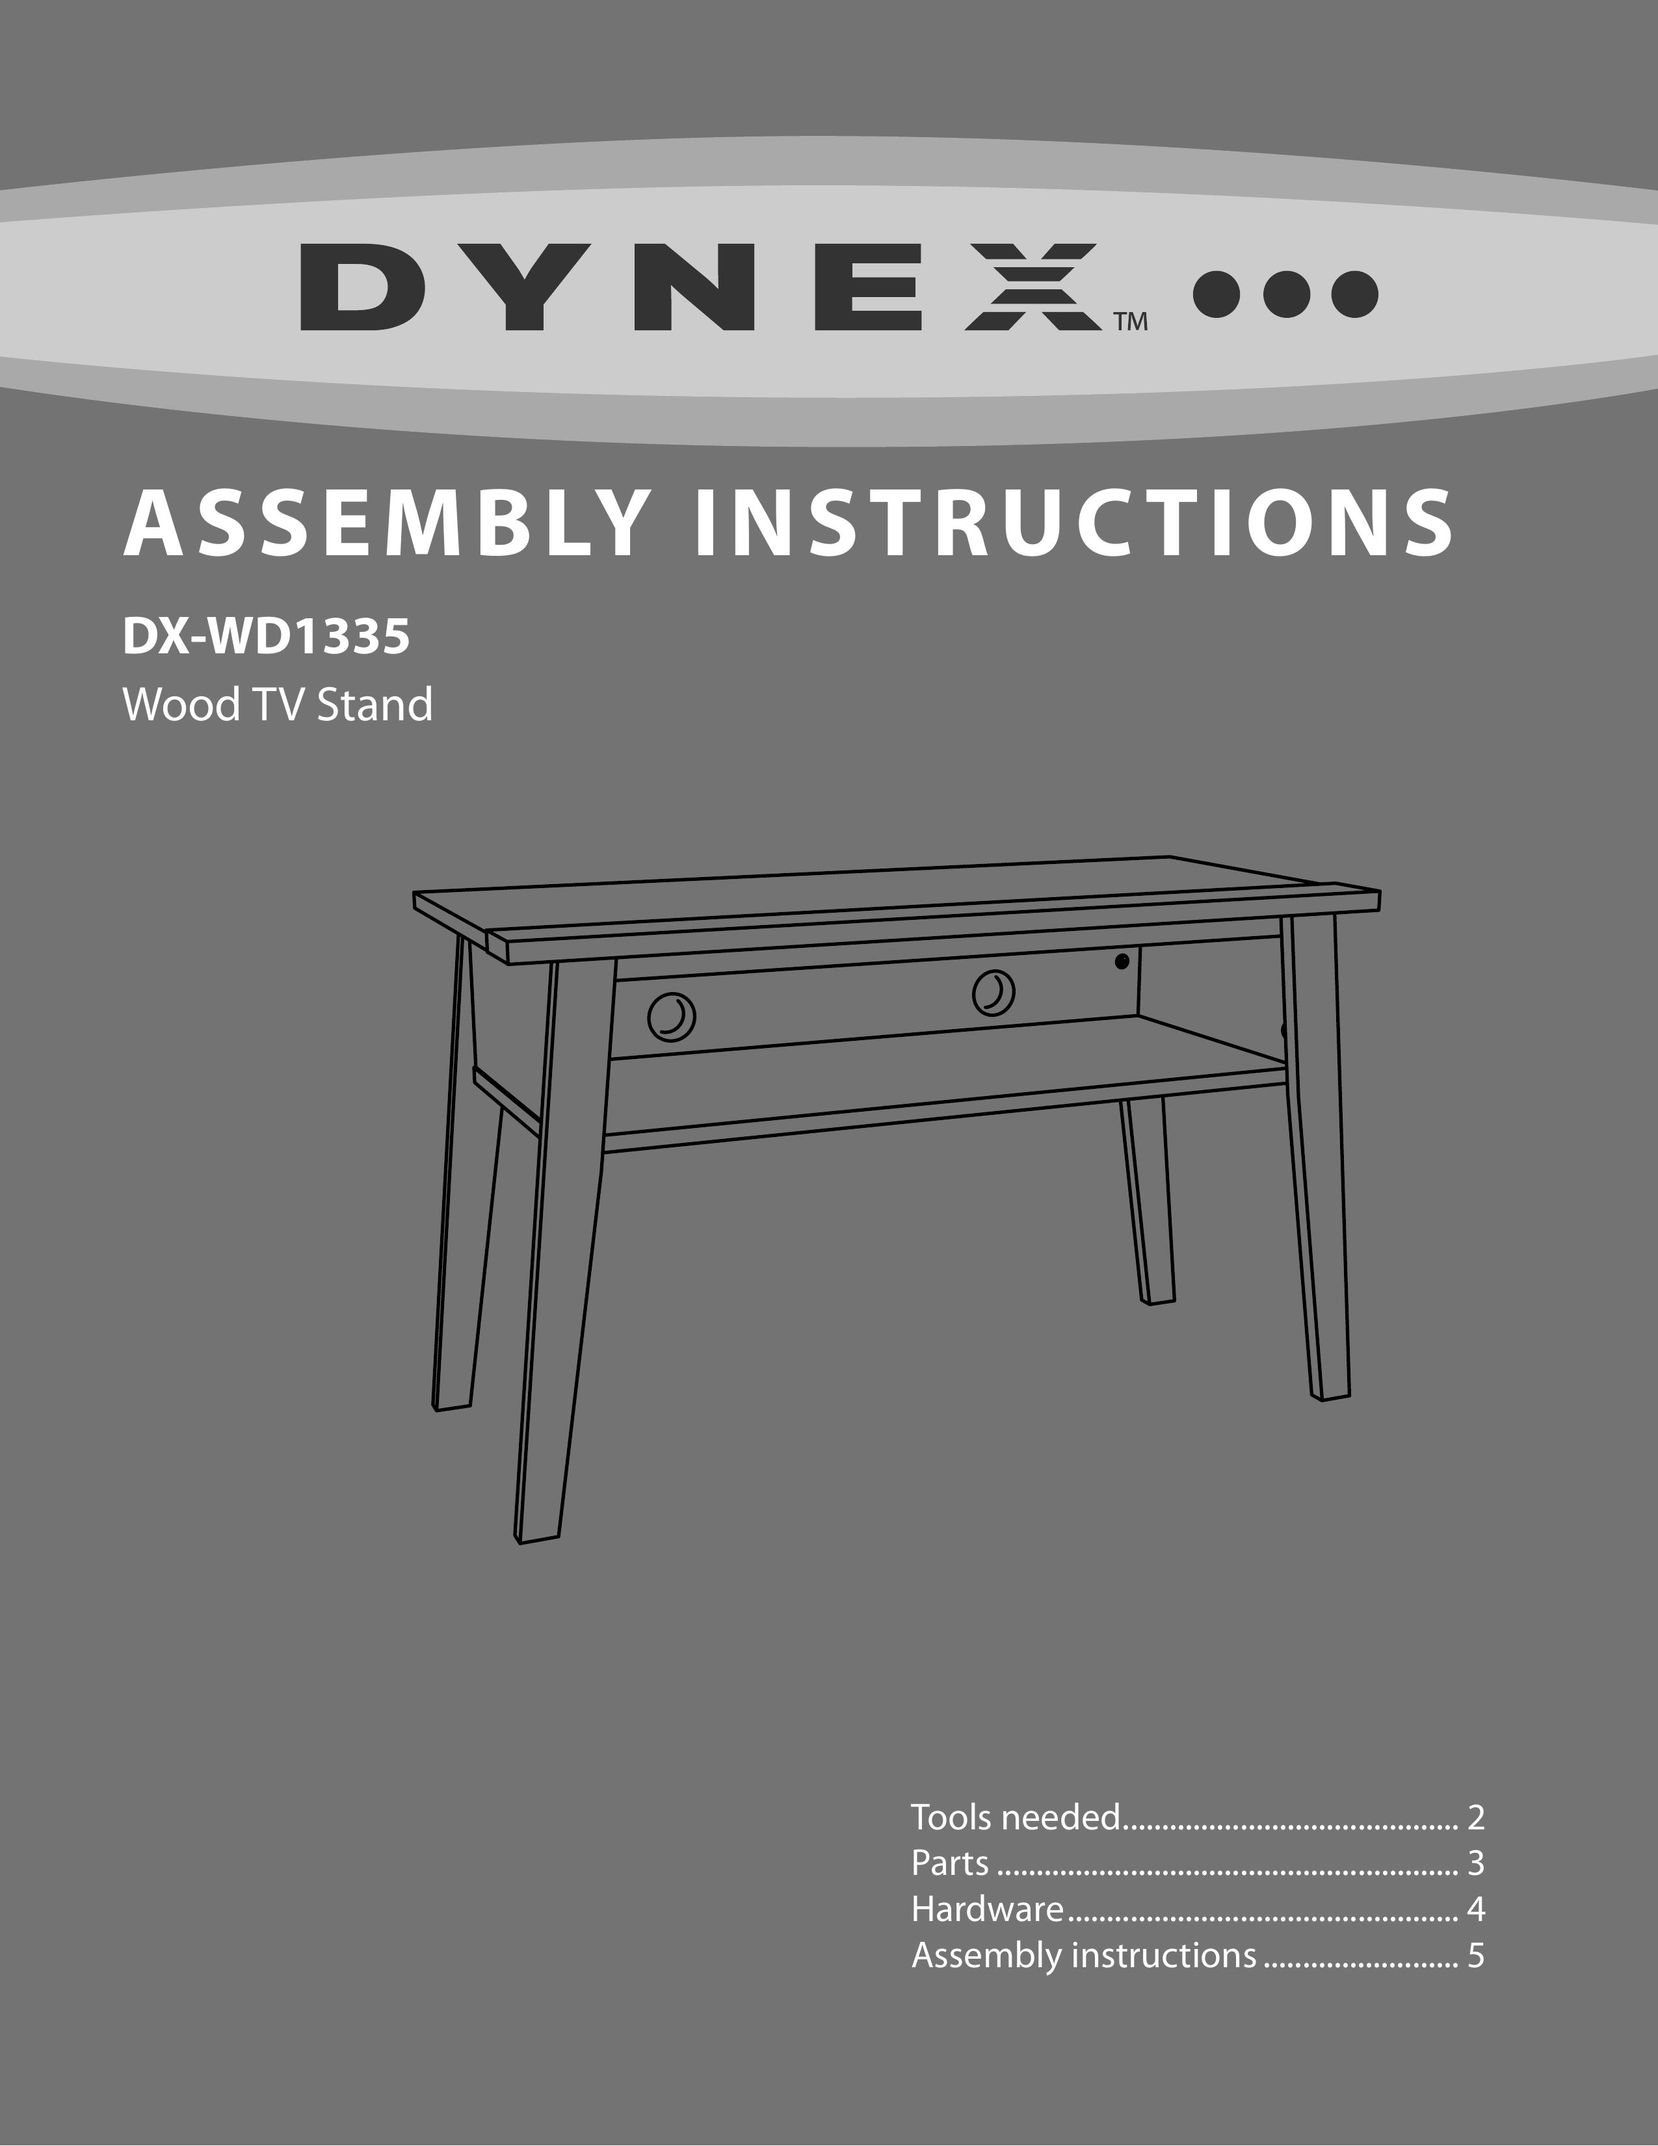 Dynex DX-WD1335 TV Video Accessories User Manual (Page 1)